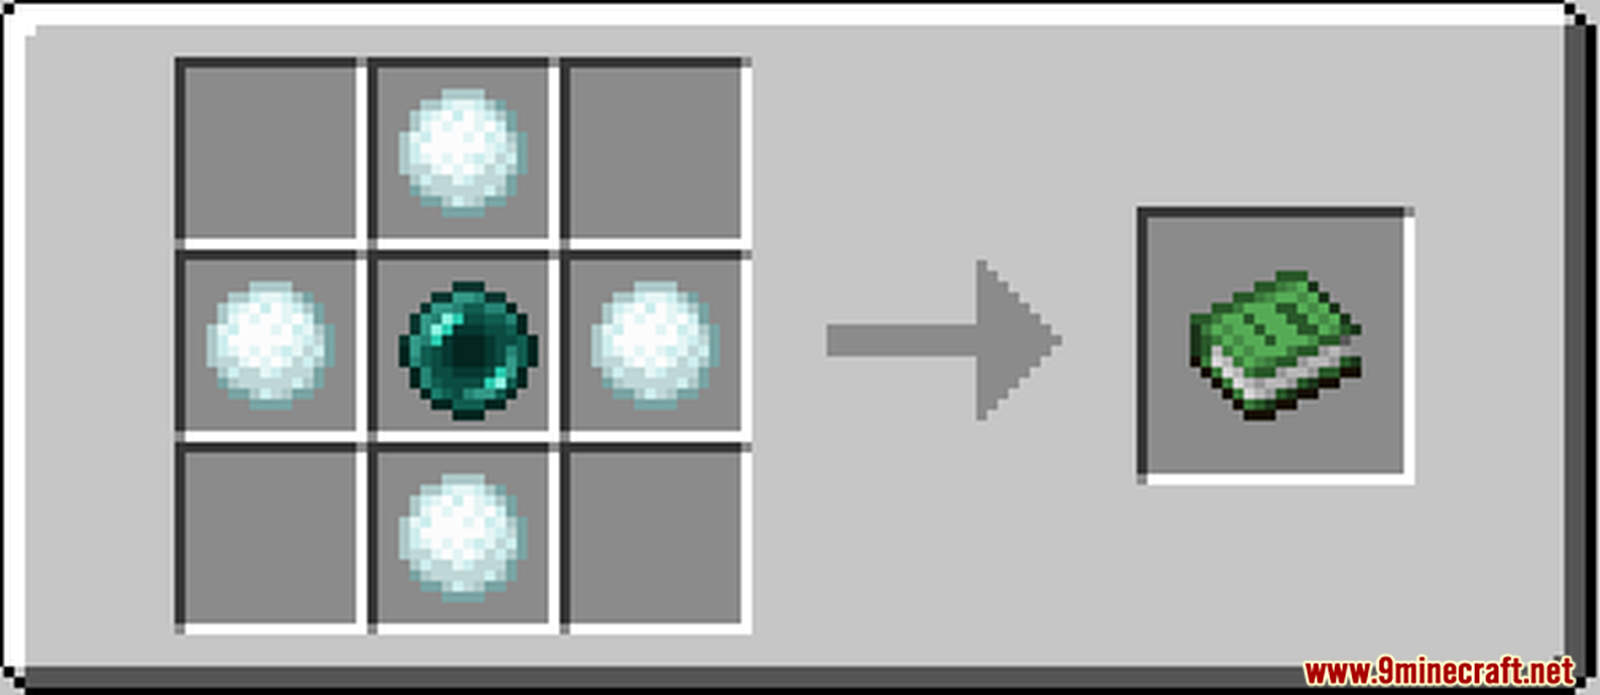 Electric Snowball Data Pack 1.17.1 (Powerful Snowball and Sword) 13